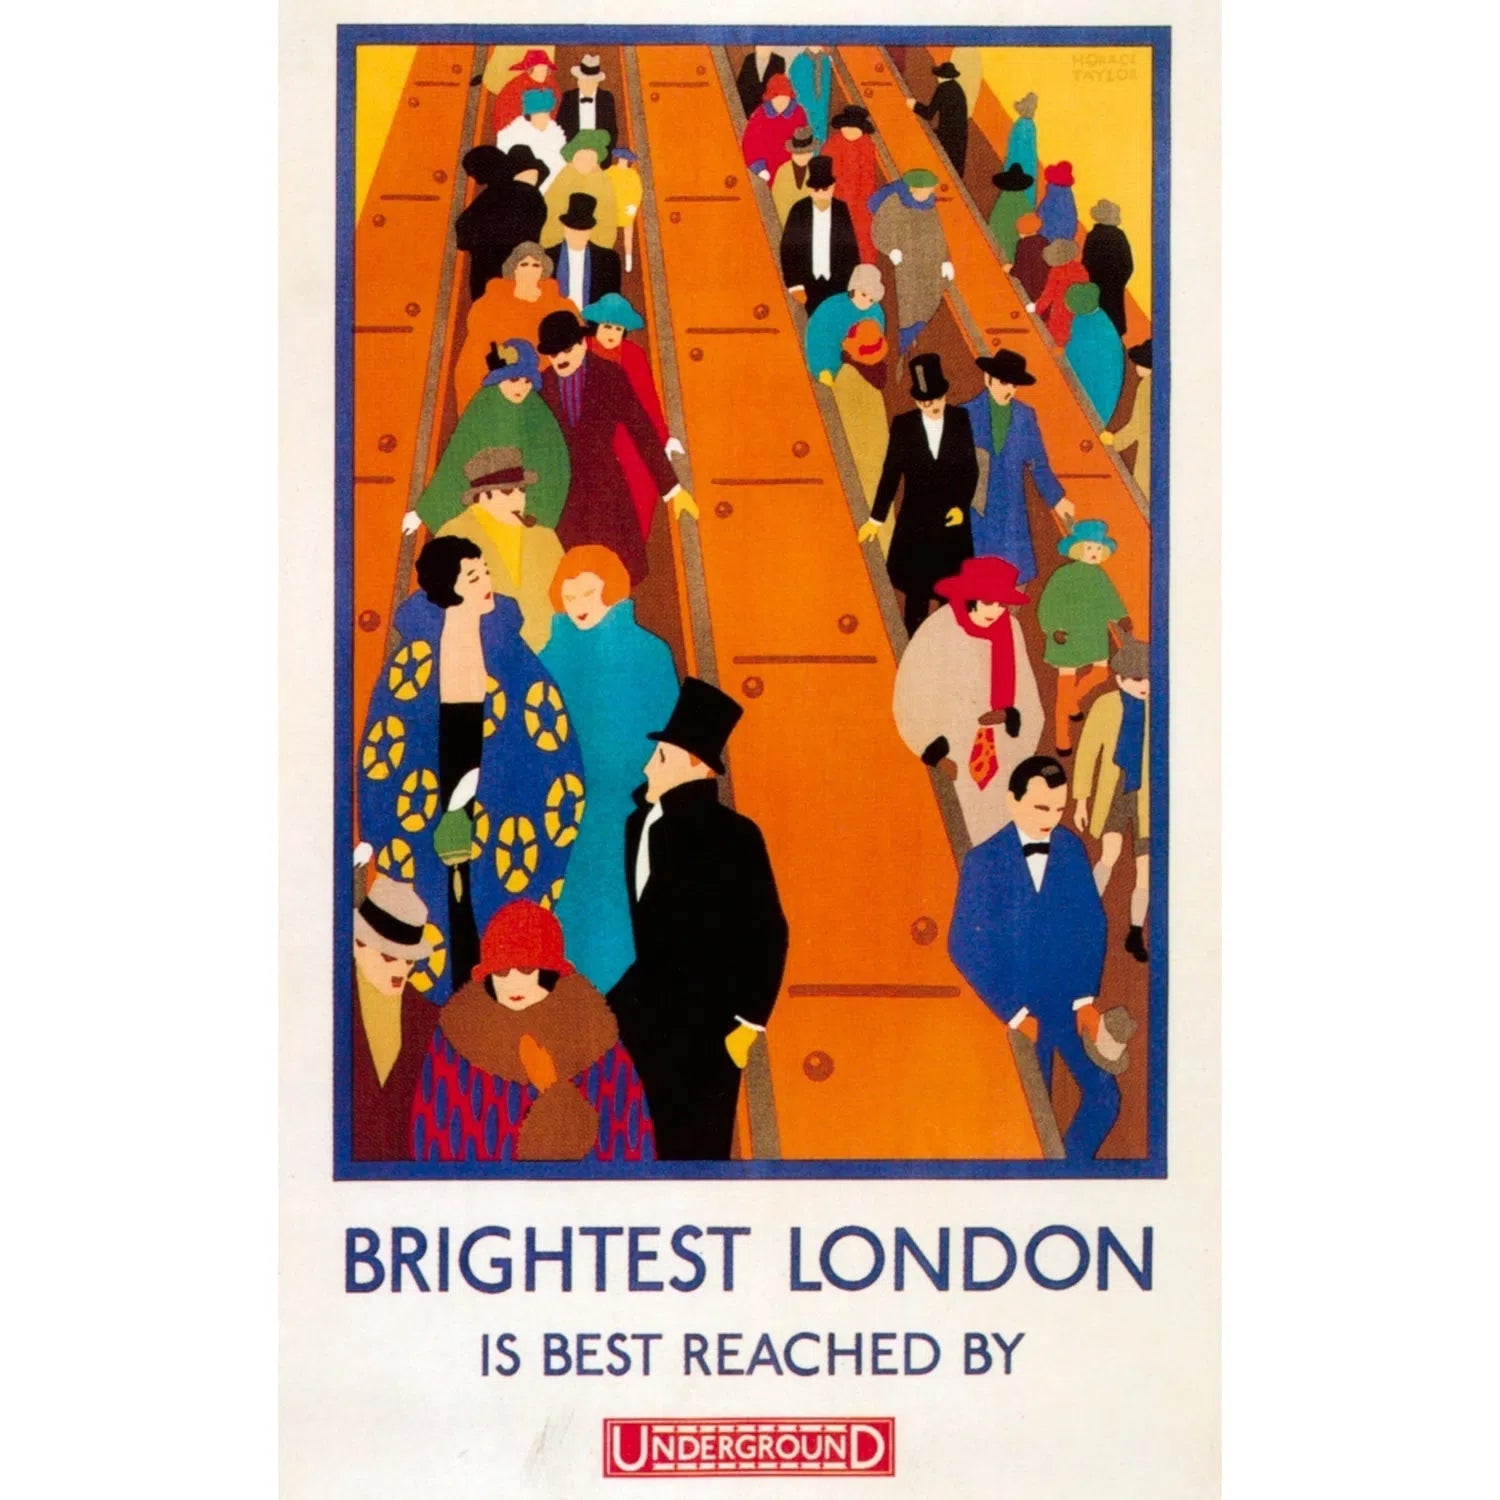 Brightest London best reached by London Underground-Imagesdartistes